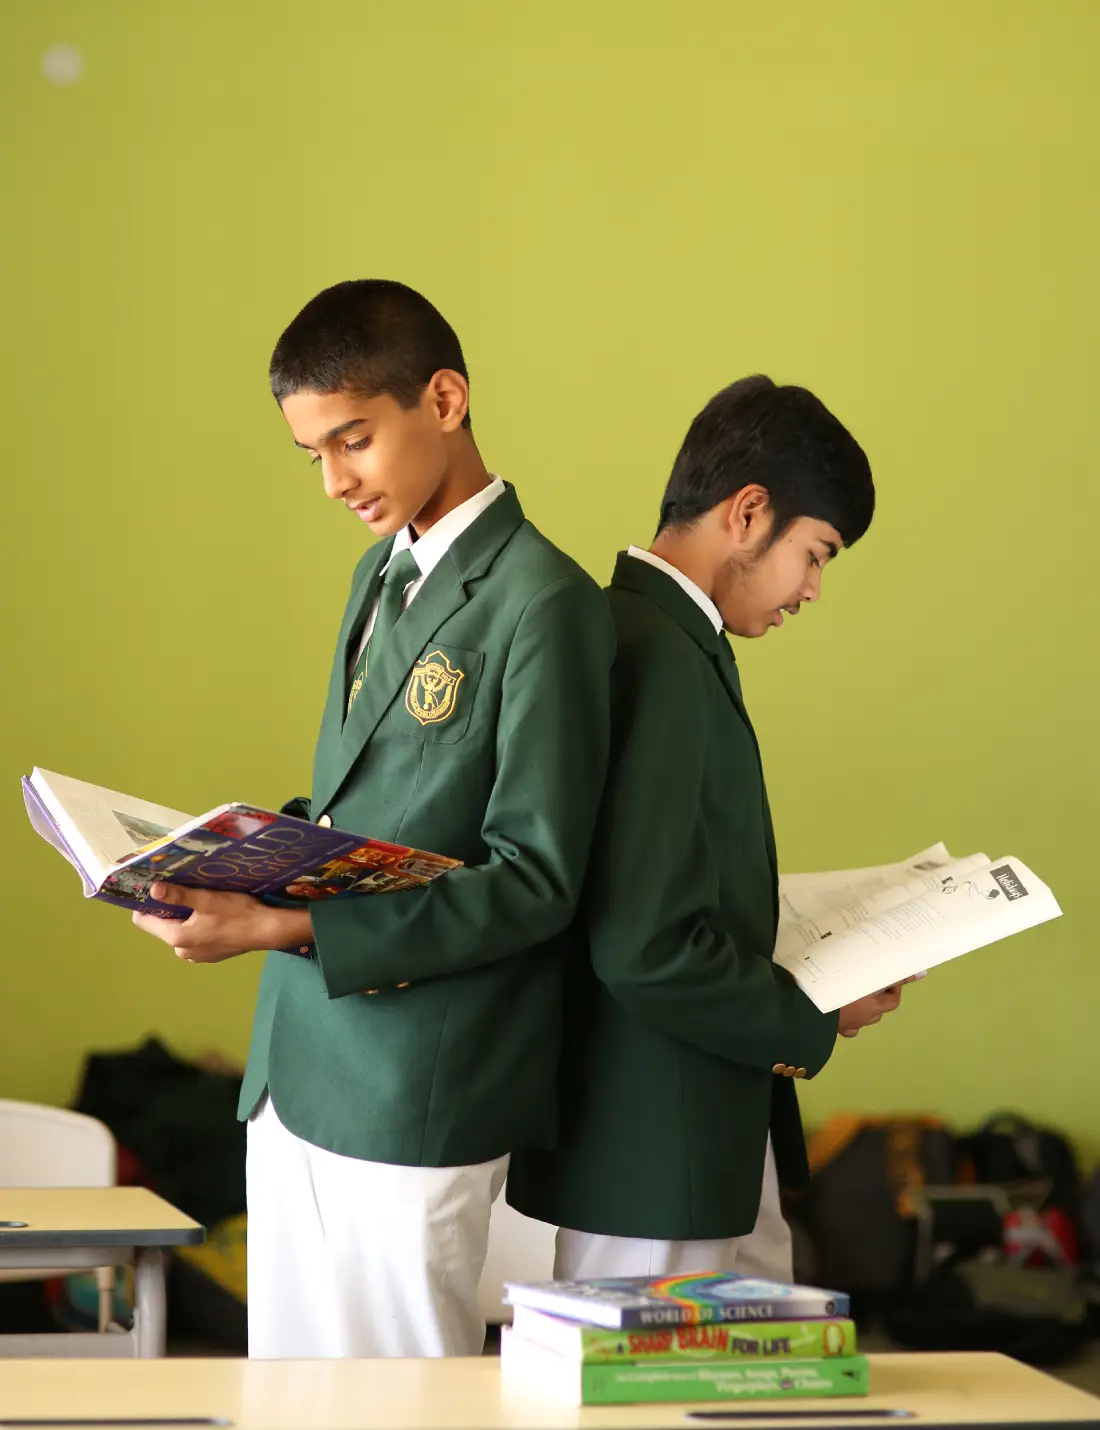 Two boys standing with a book in their hands in a white-green school uniform.